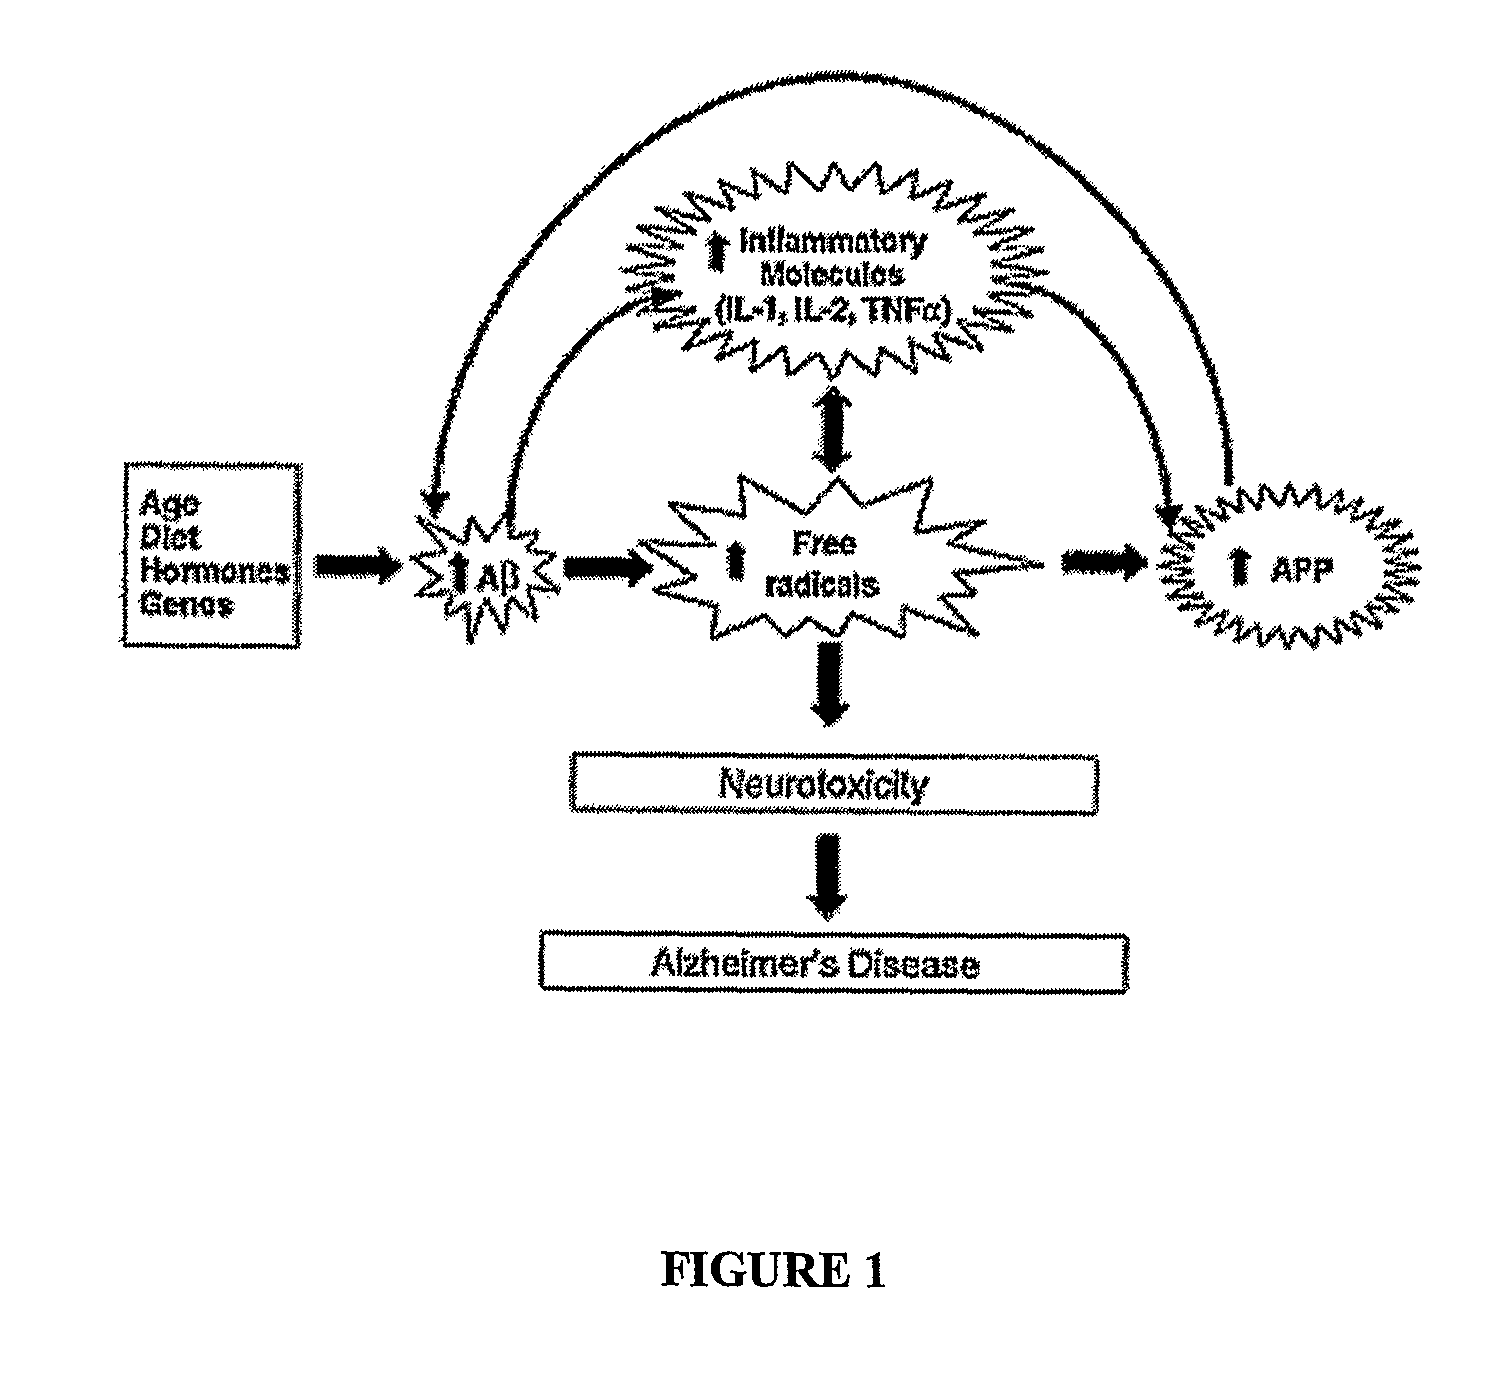 Nitroxides for use in treating or preventing amyloid-related diseases